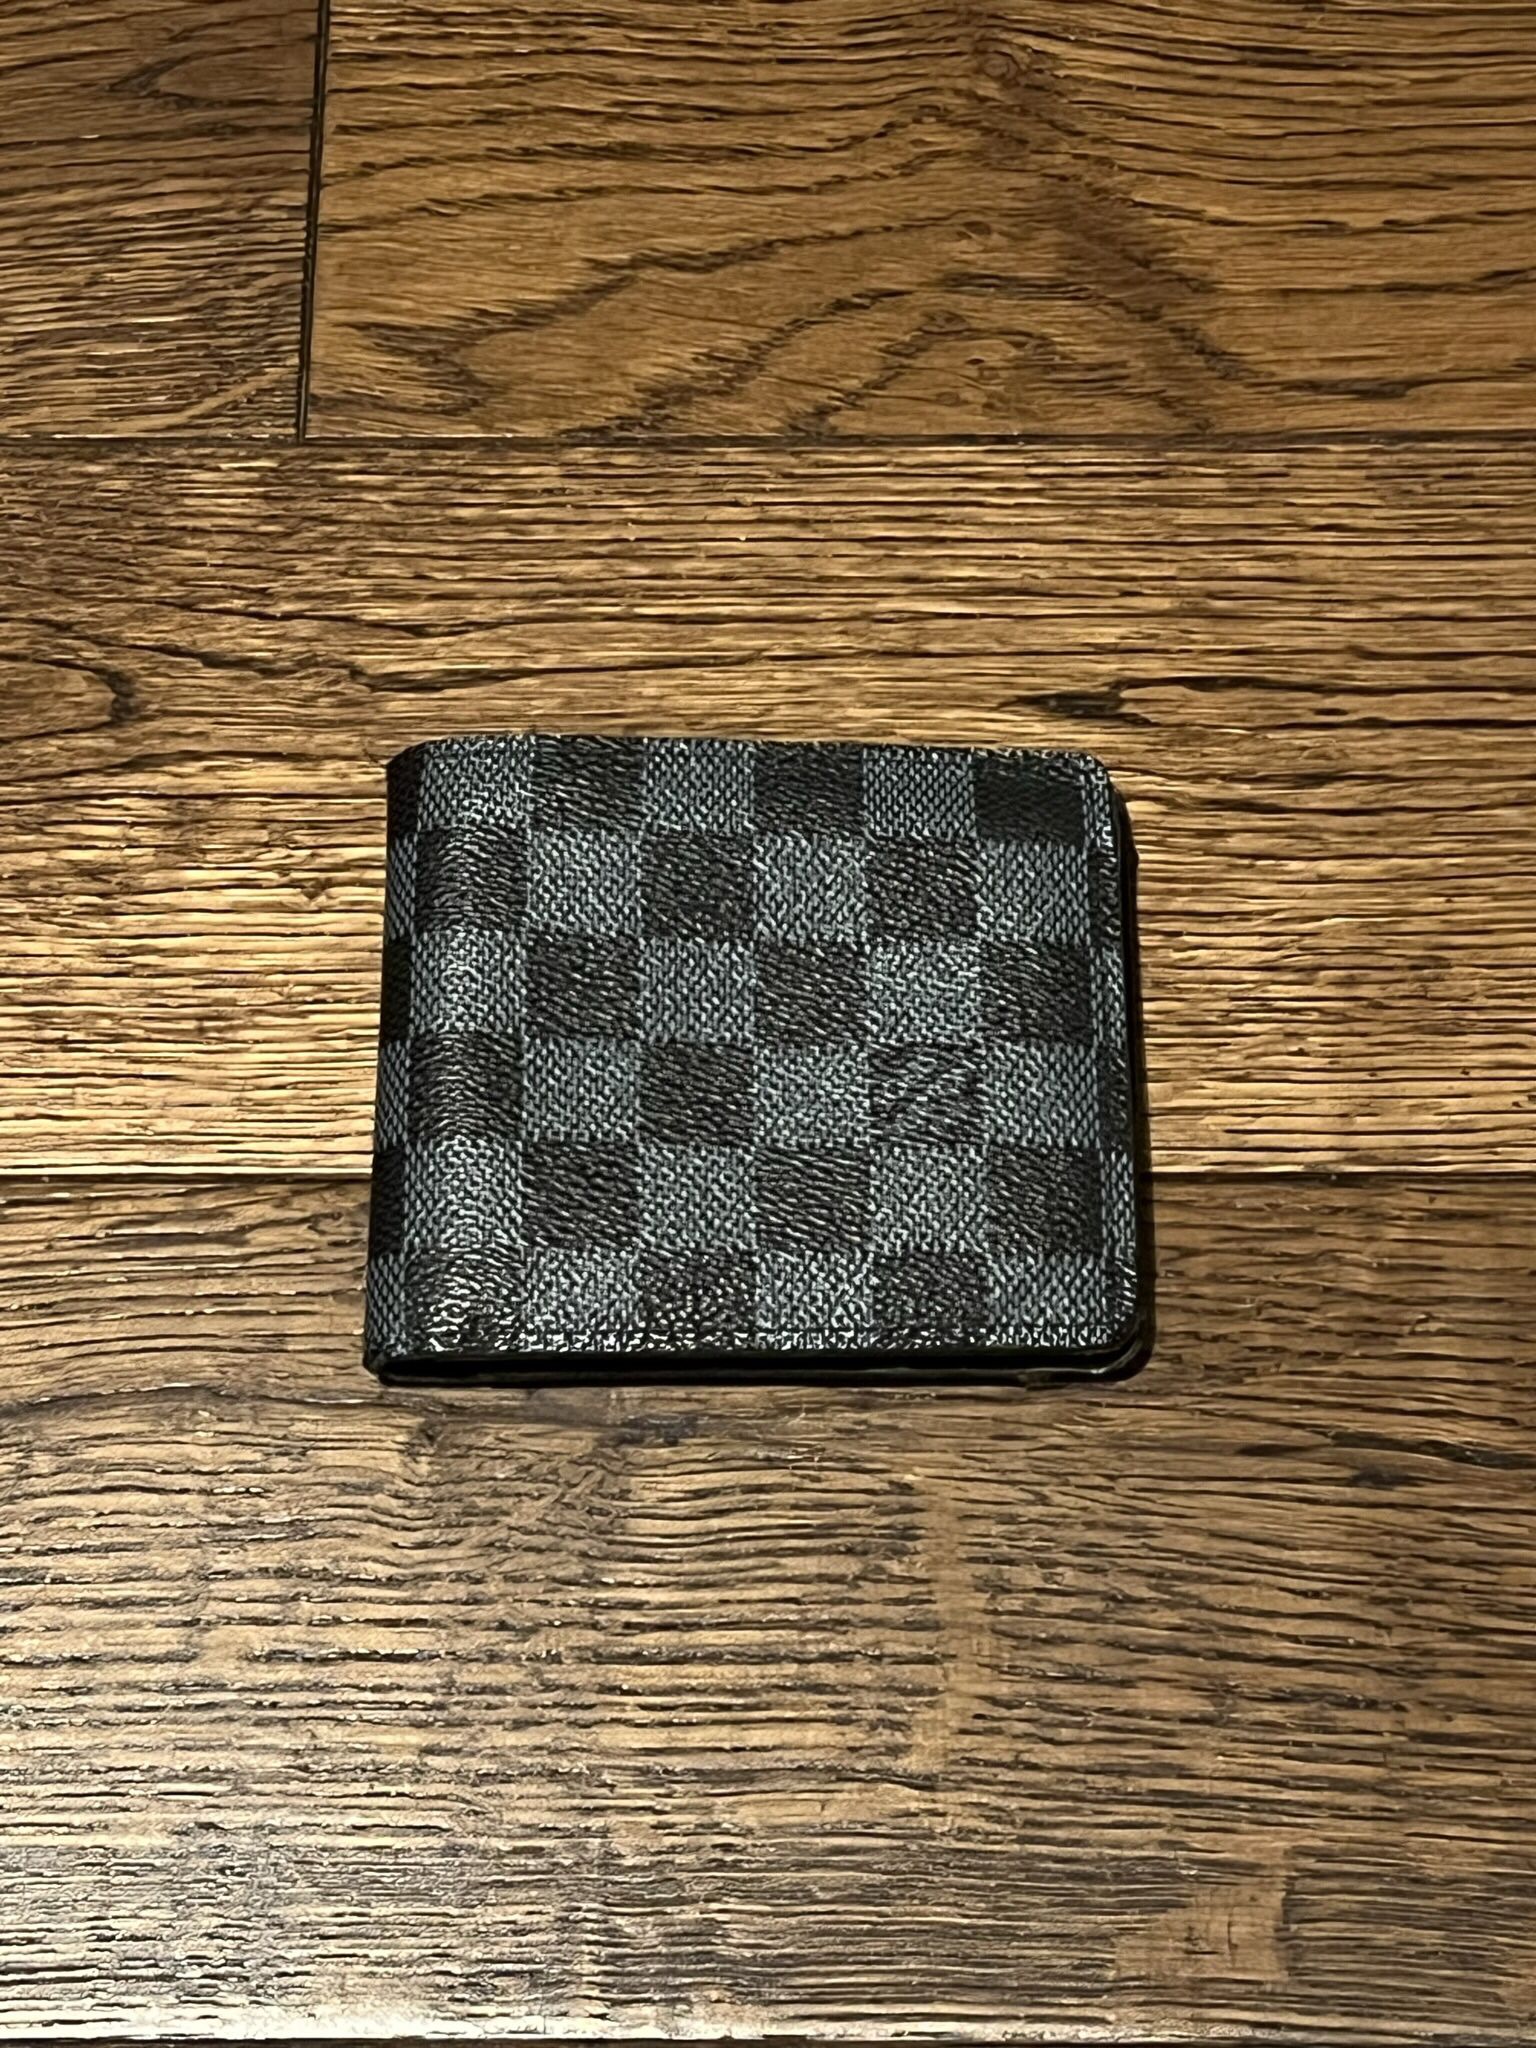 Used High Quality Louis Vuitton Wallet for Sale in Niles, IL - OfferUp